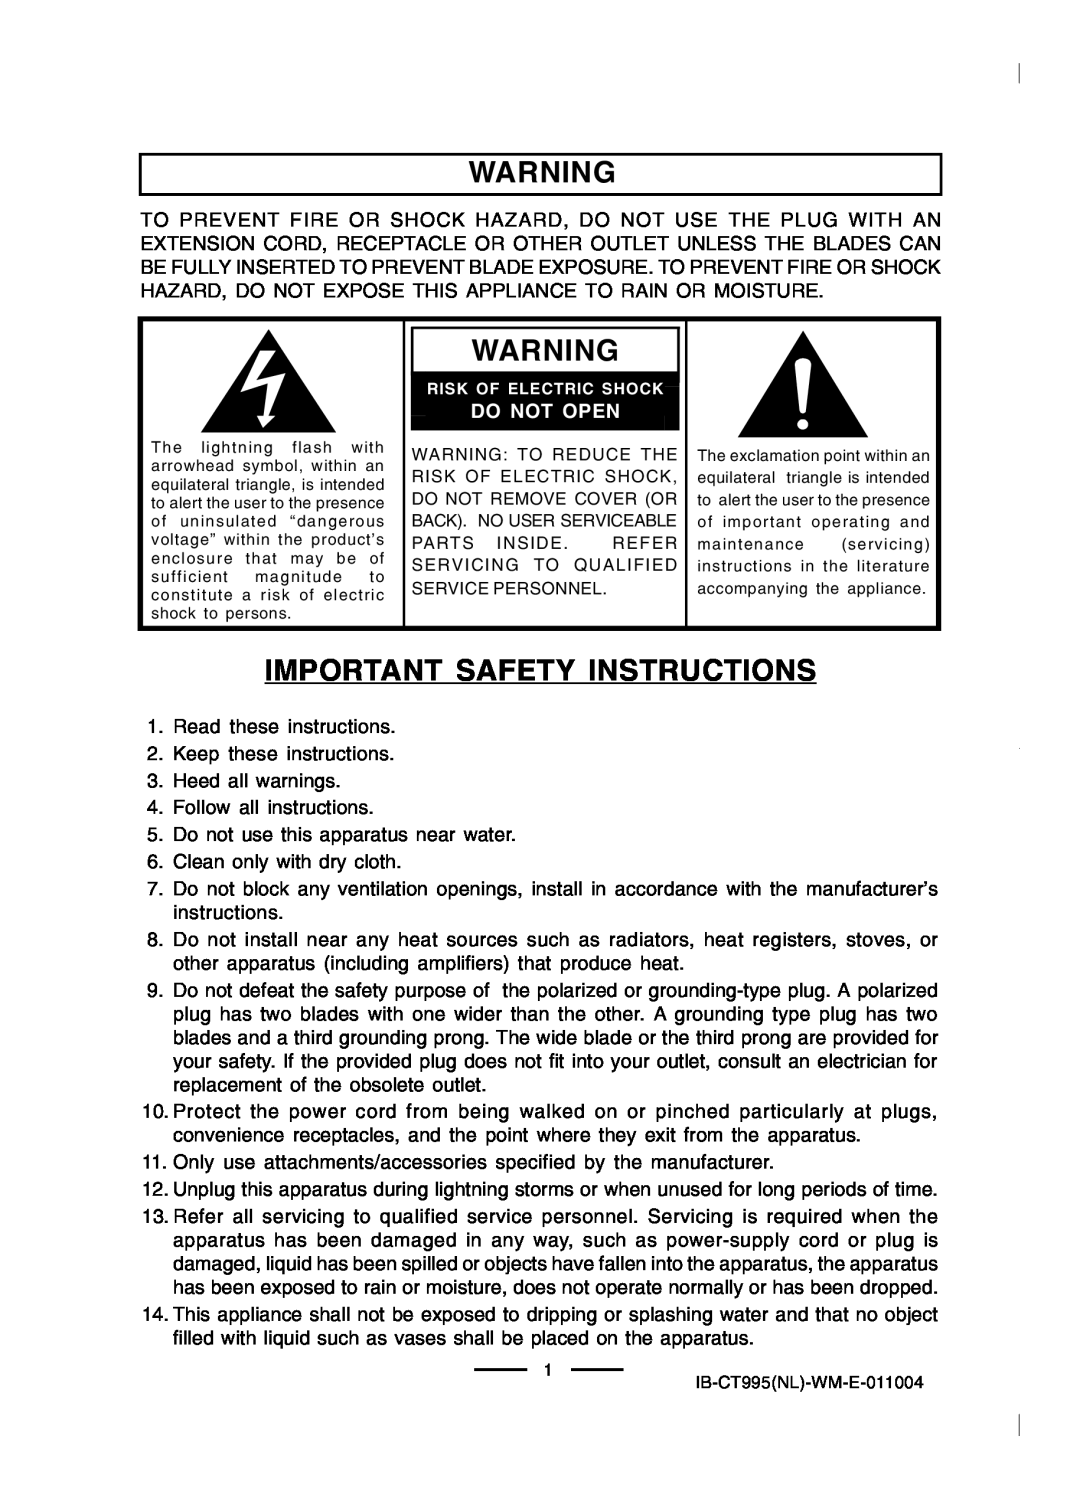 Lenoxx Electronics CT-995 operating instructions Important Safety Instructions, Do Not Open 